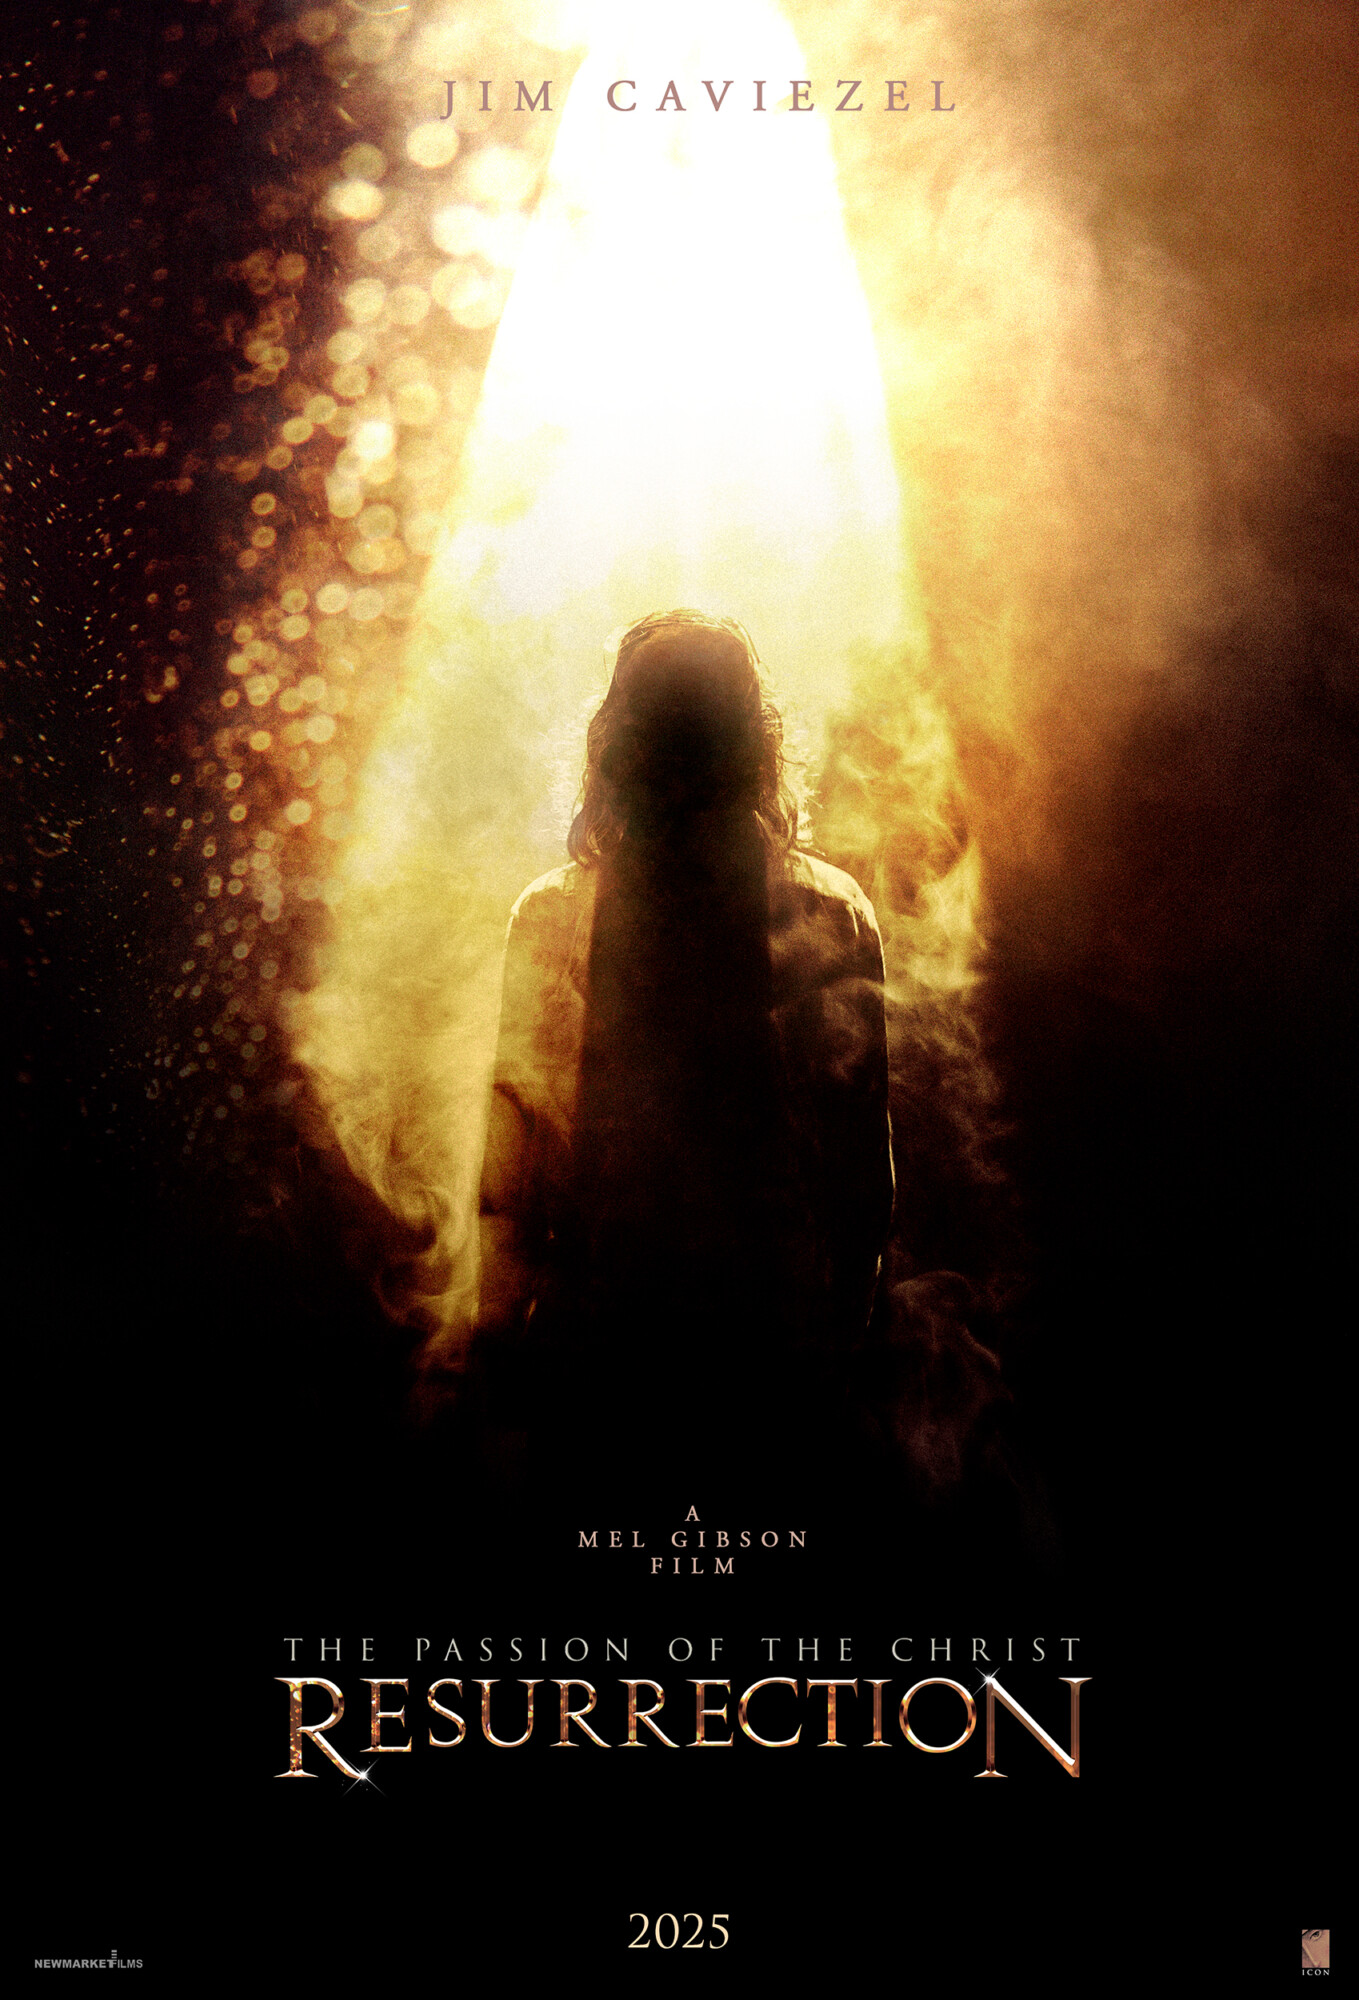 The Passion Of The Christ: Resurrection | Grievity | PosterSpy